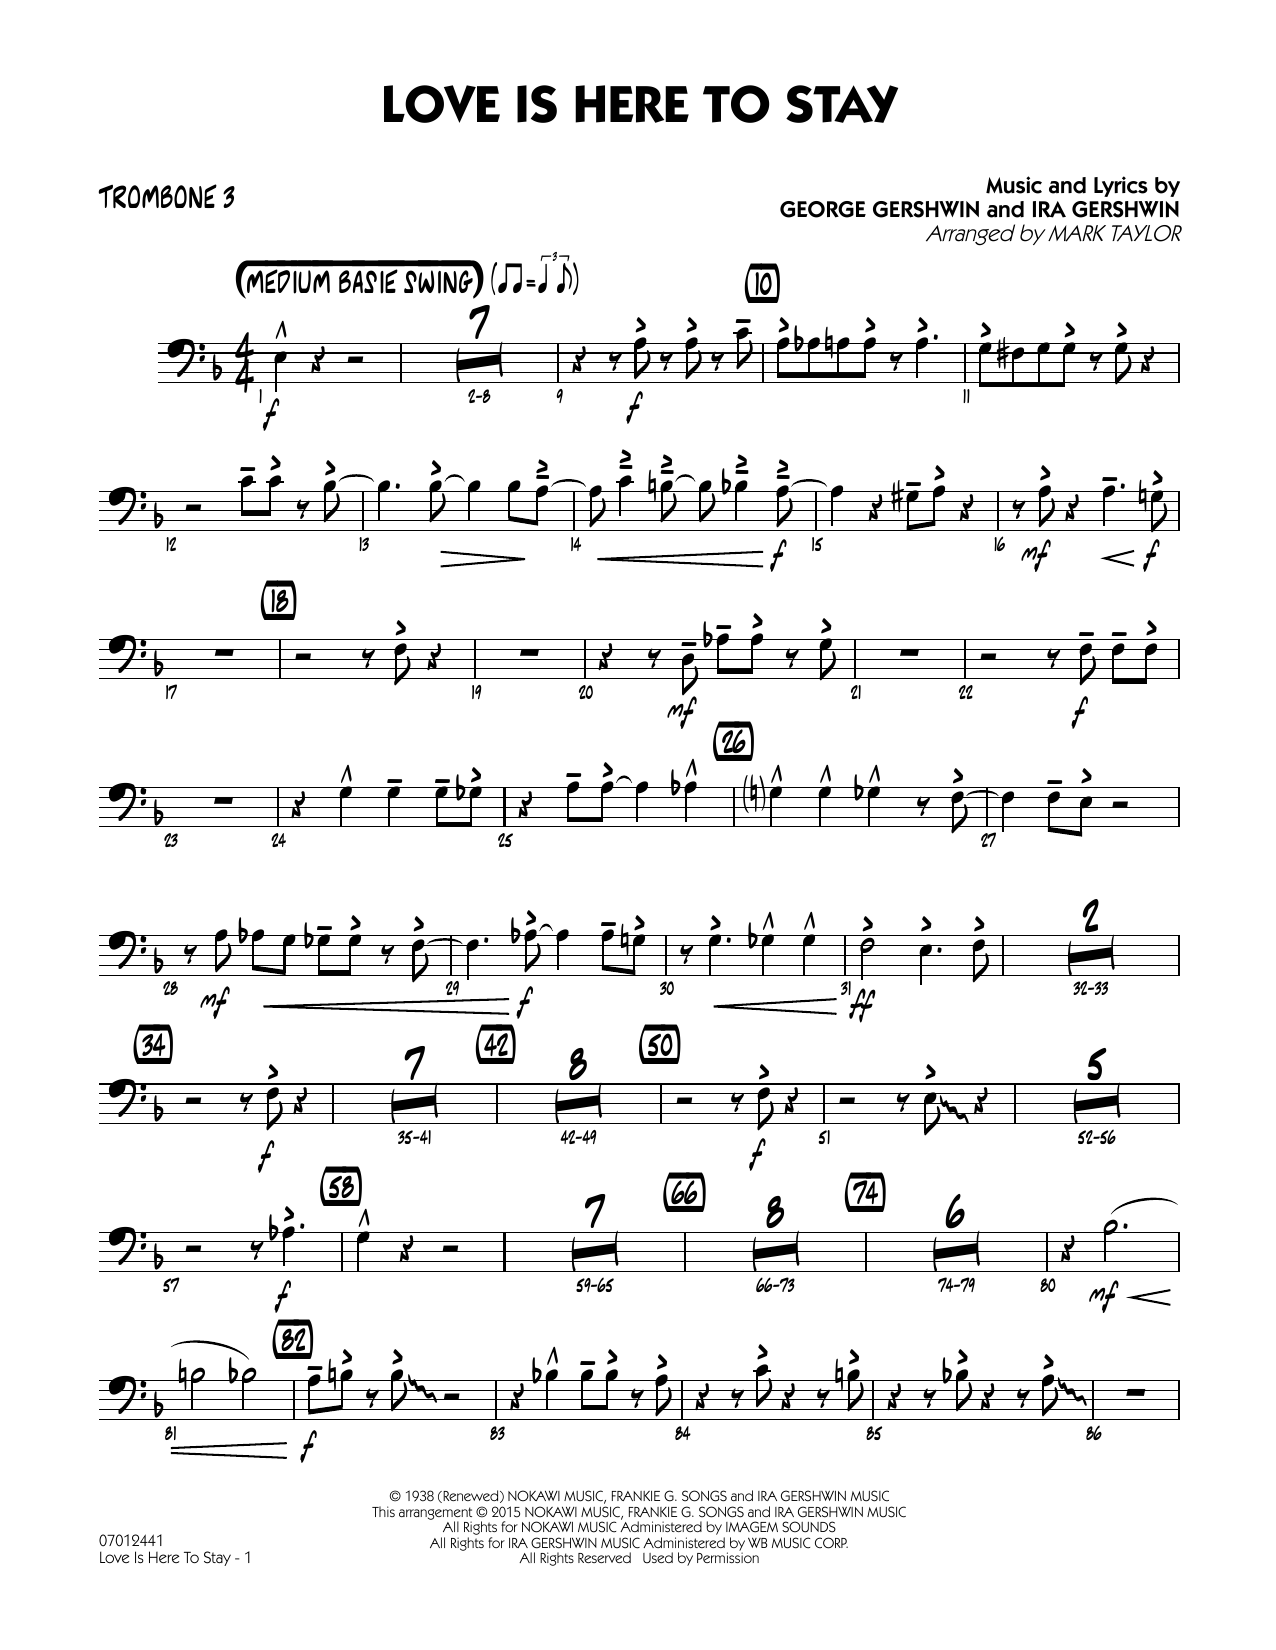 Mark Taylor Love Is Here to Stay - Trombone 3 sheet music notes and chords. Download Printable PDF.